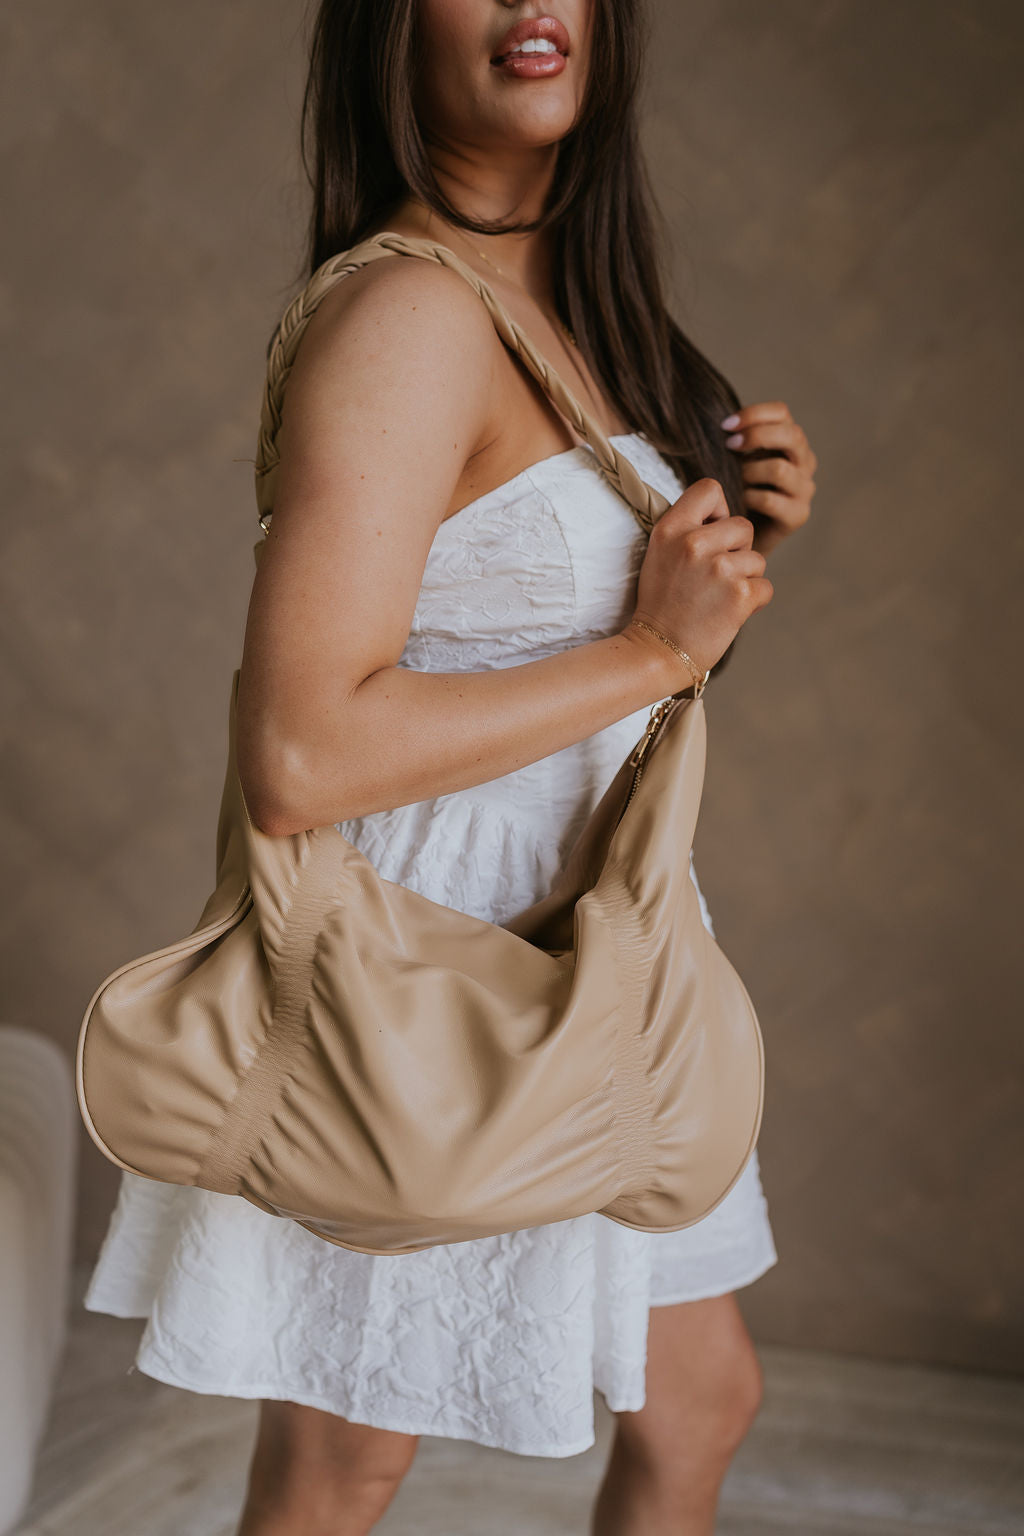 Close up side view of female model wearing the Amber Natural Braided Purse which features natural tan leather fabric, braided strap, gold zipper and gold hardware details